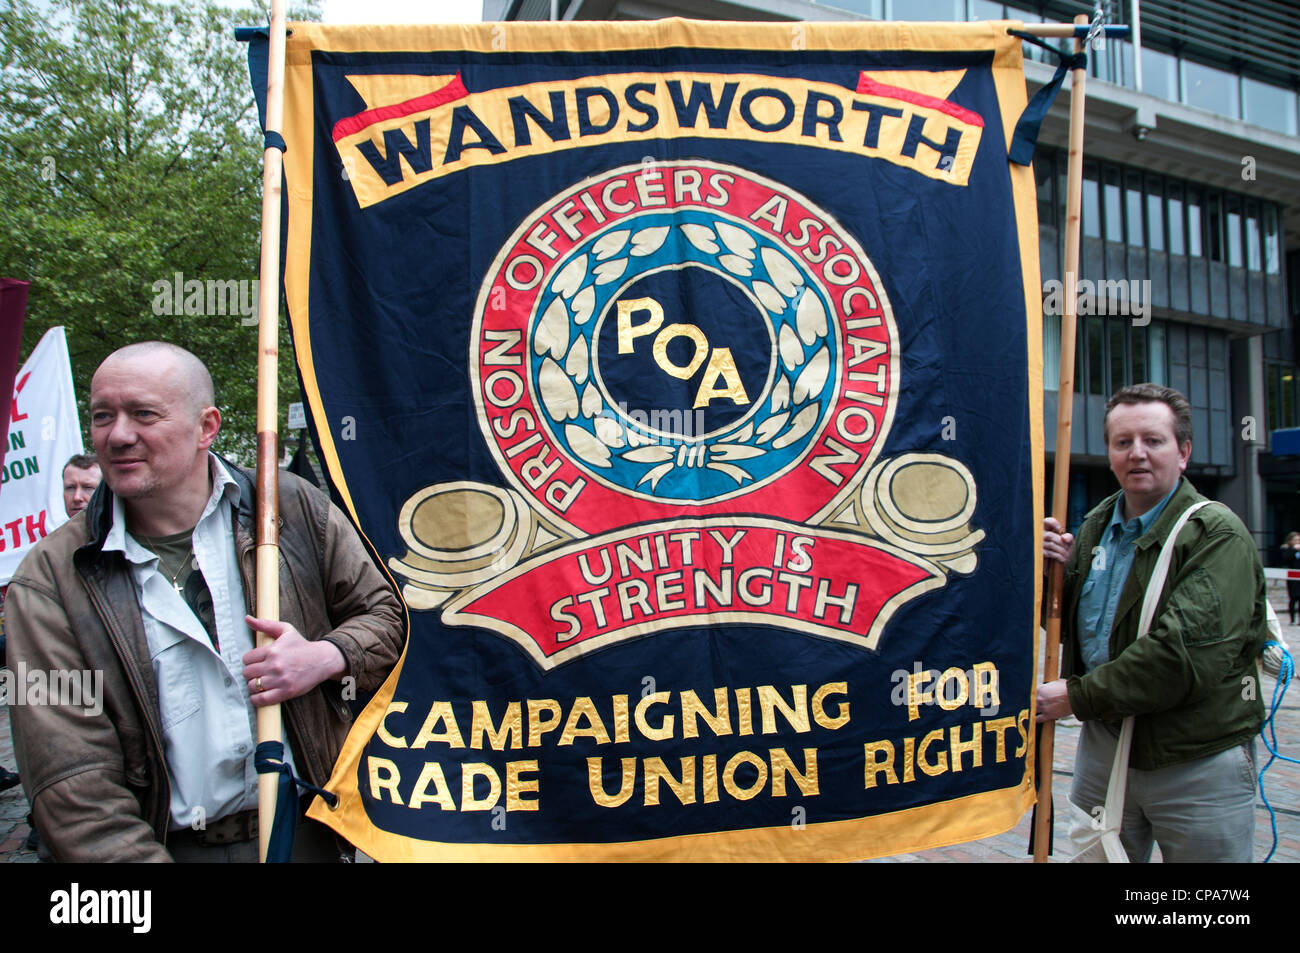 Public sector workers demonstrate against changes to their pension. Prison officers from Wandsworth carry their Union banner Stock Photo